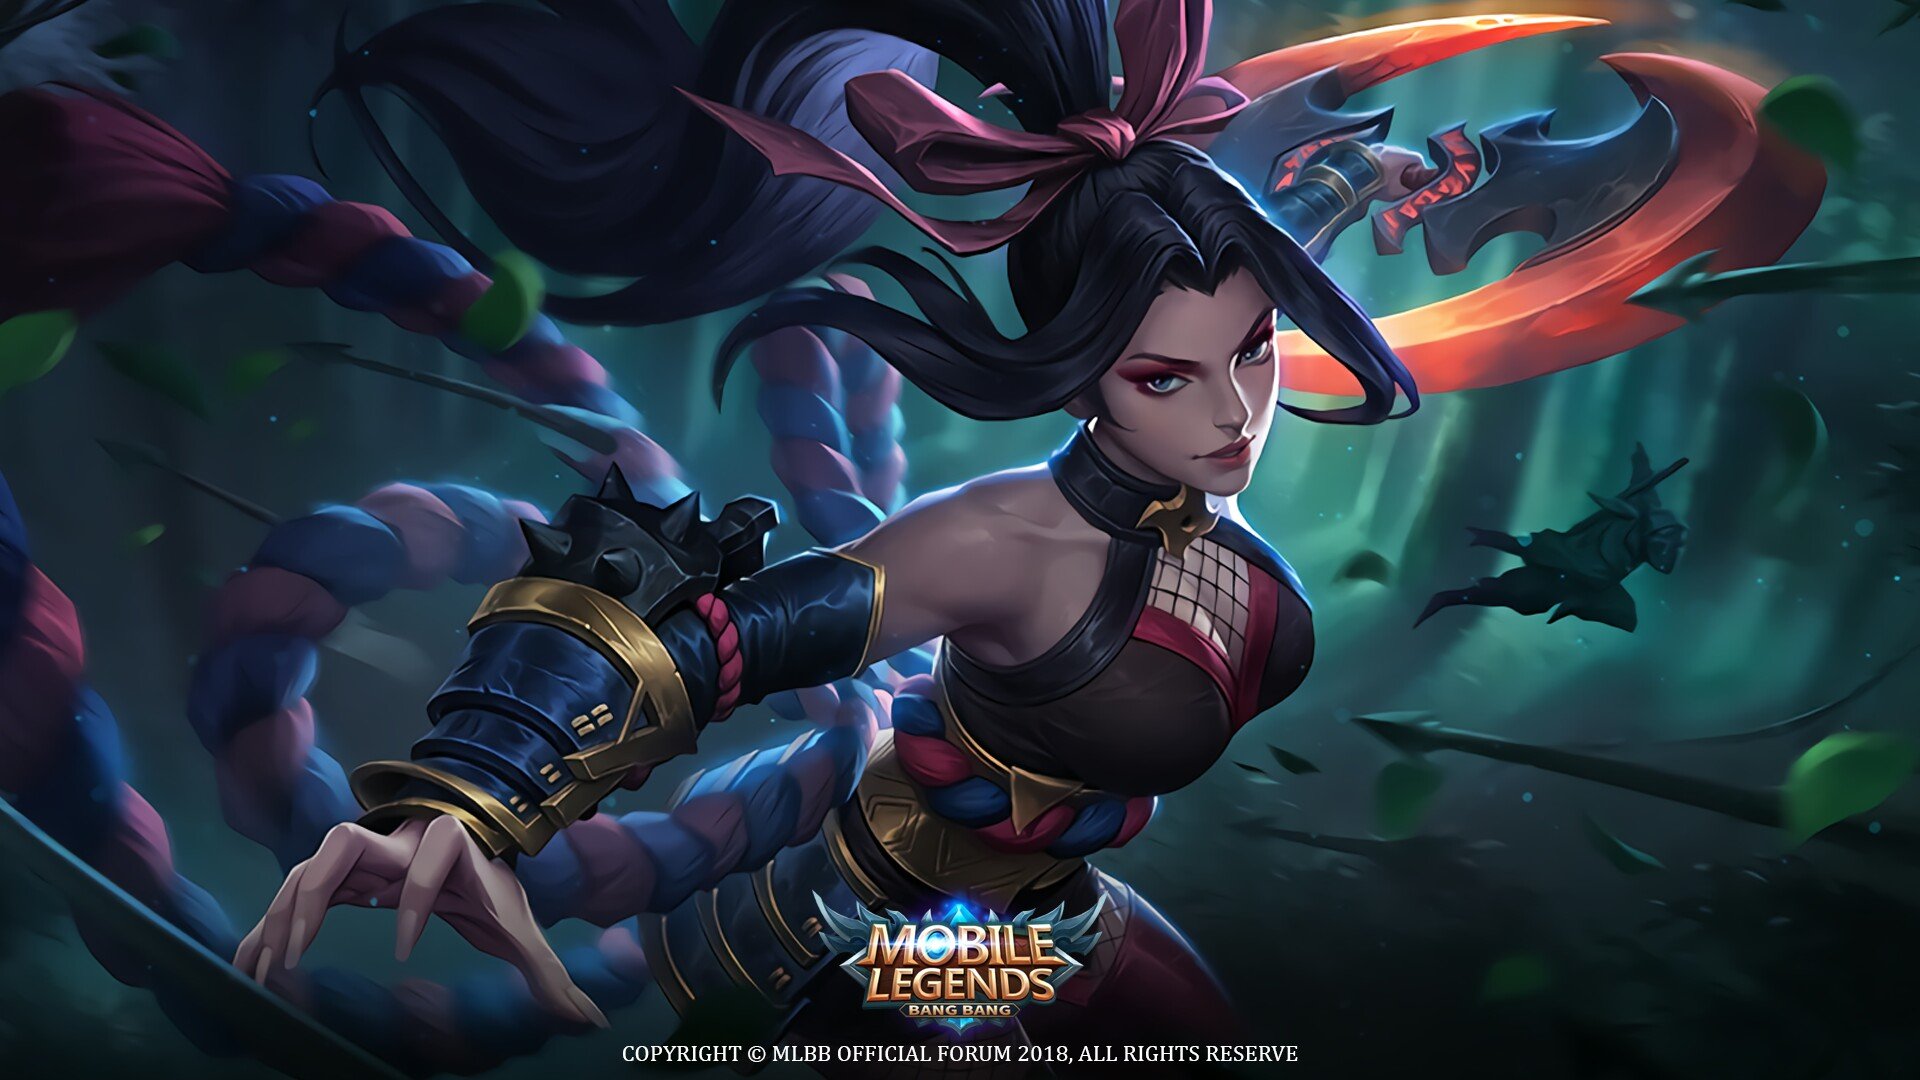 120 Best Mobile Legends Wallpapers Ever Download for Mobile 1920x1080